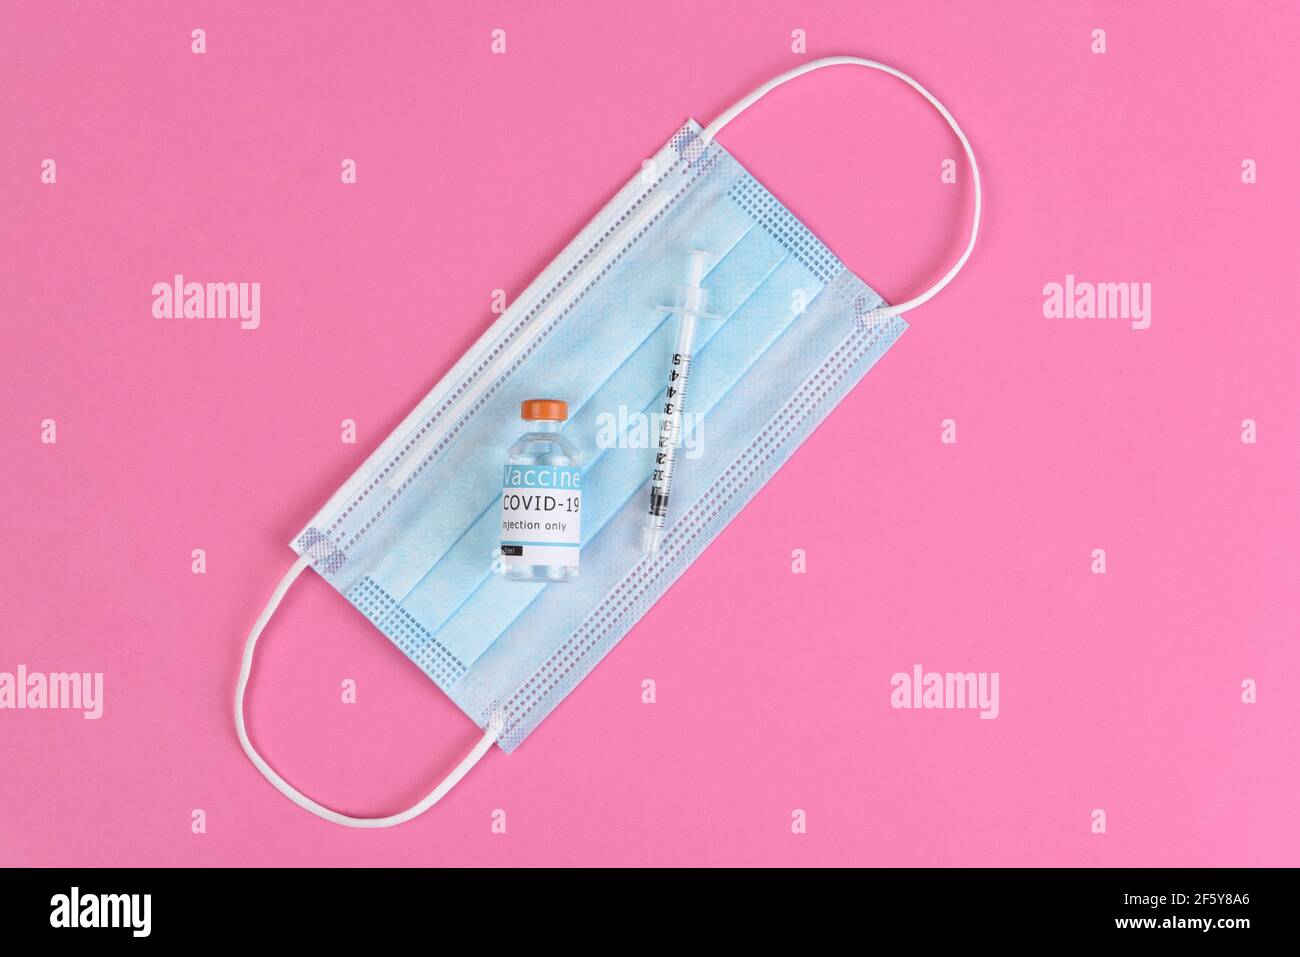 Equipment to administer a Covid19 Vaccination. Flat lay with surgical mask, syringe and vaccine vial, on pink background. Stock Photo